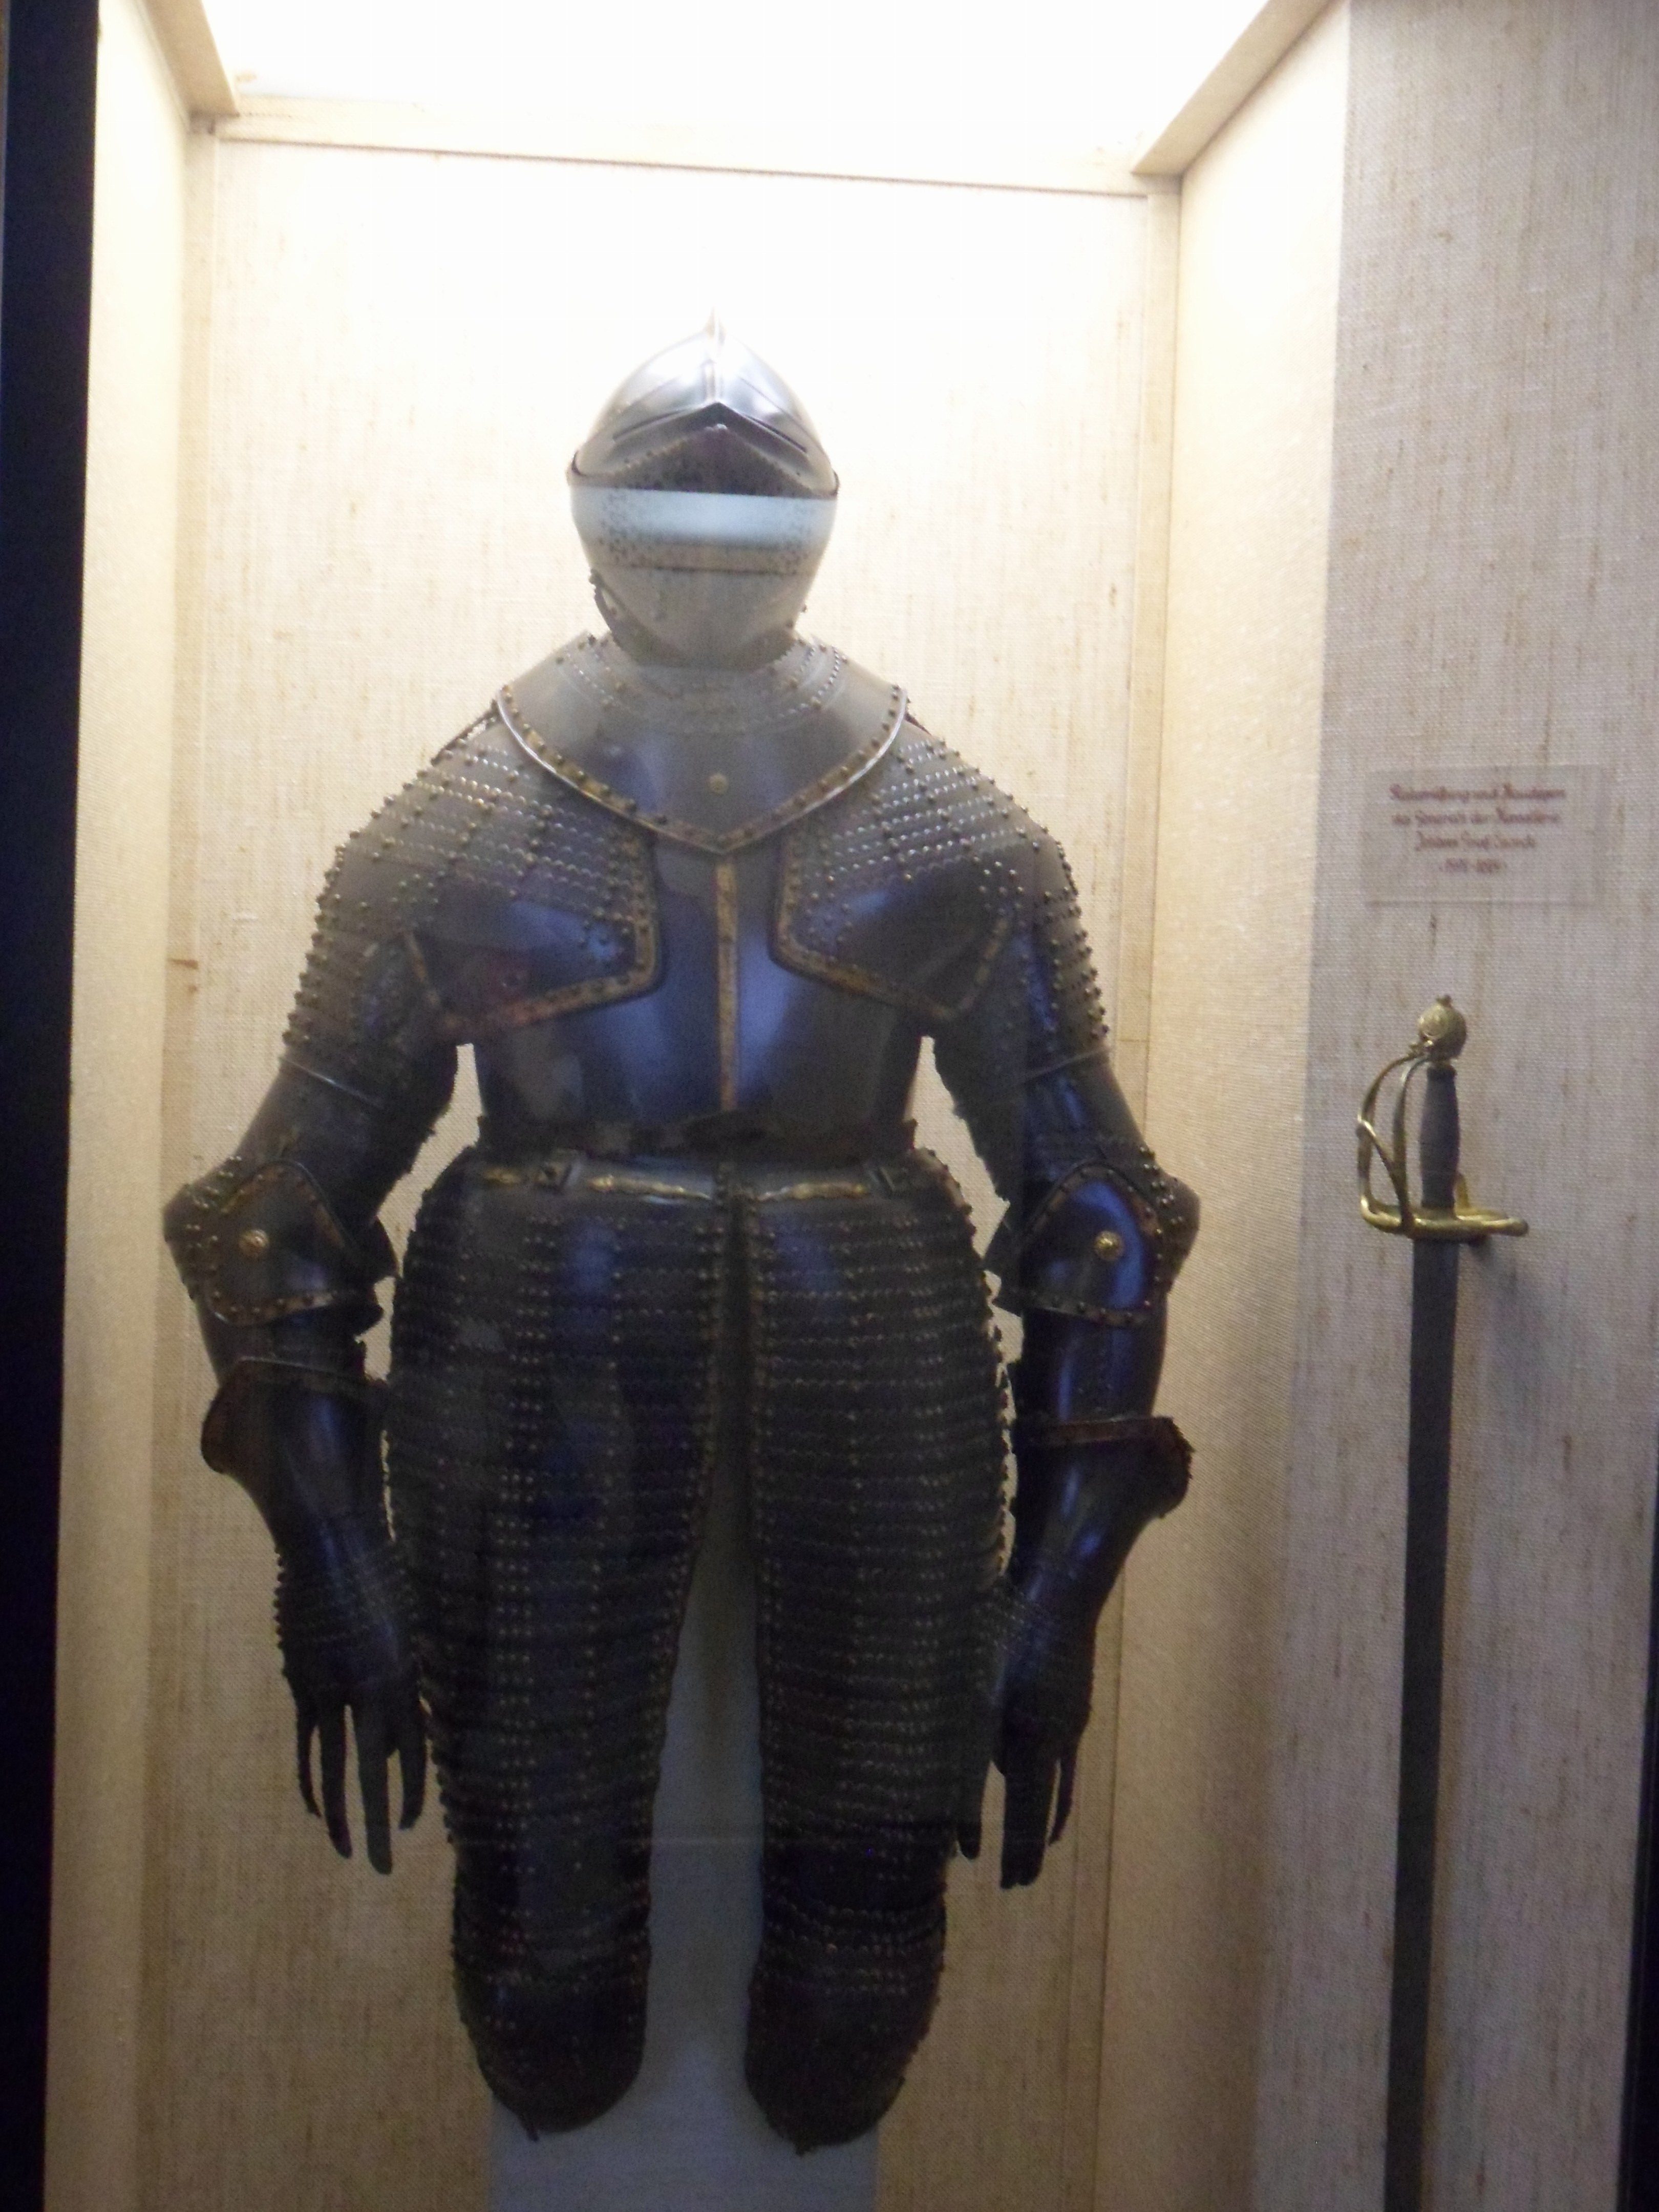 Suit of black plate armour with a closed helmet, articulated pauldrons, and tassets which flare at the hips and extend below the knees